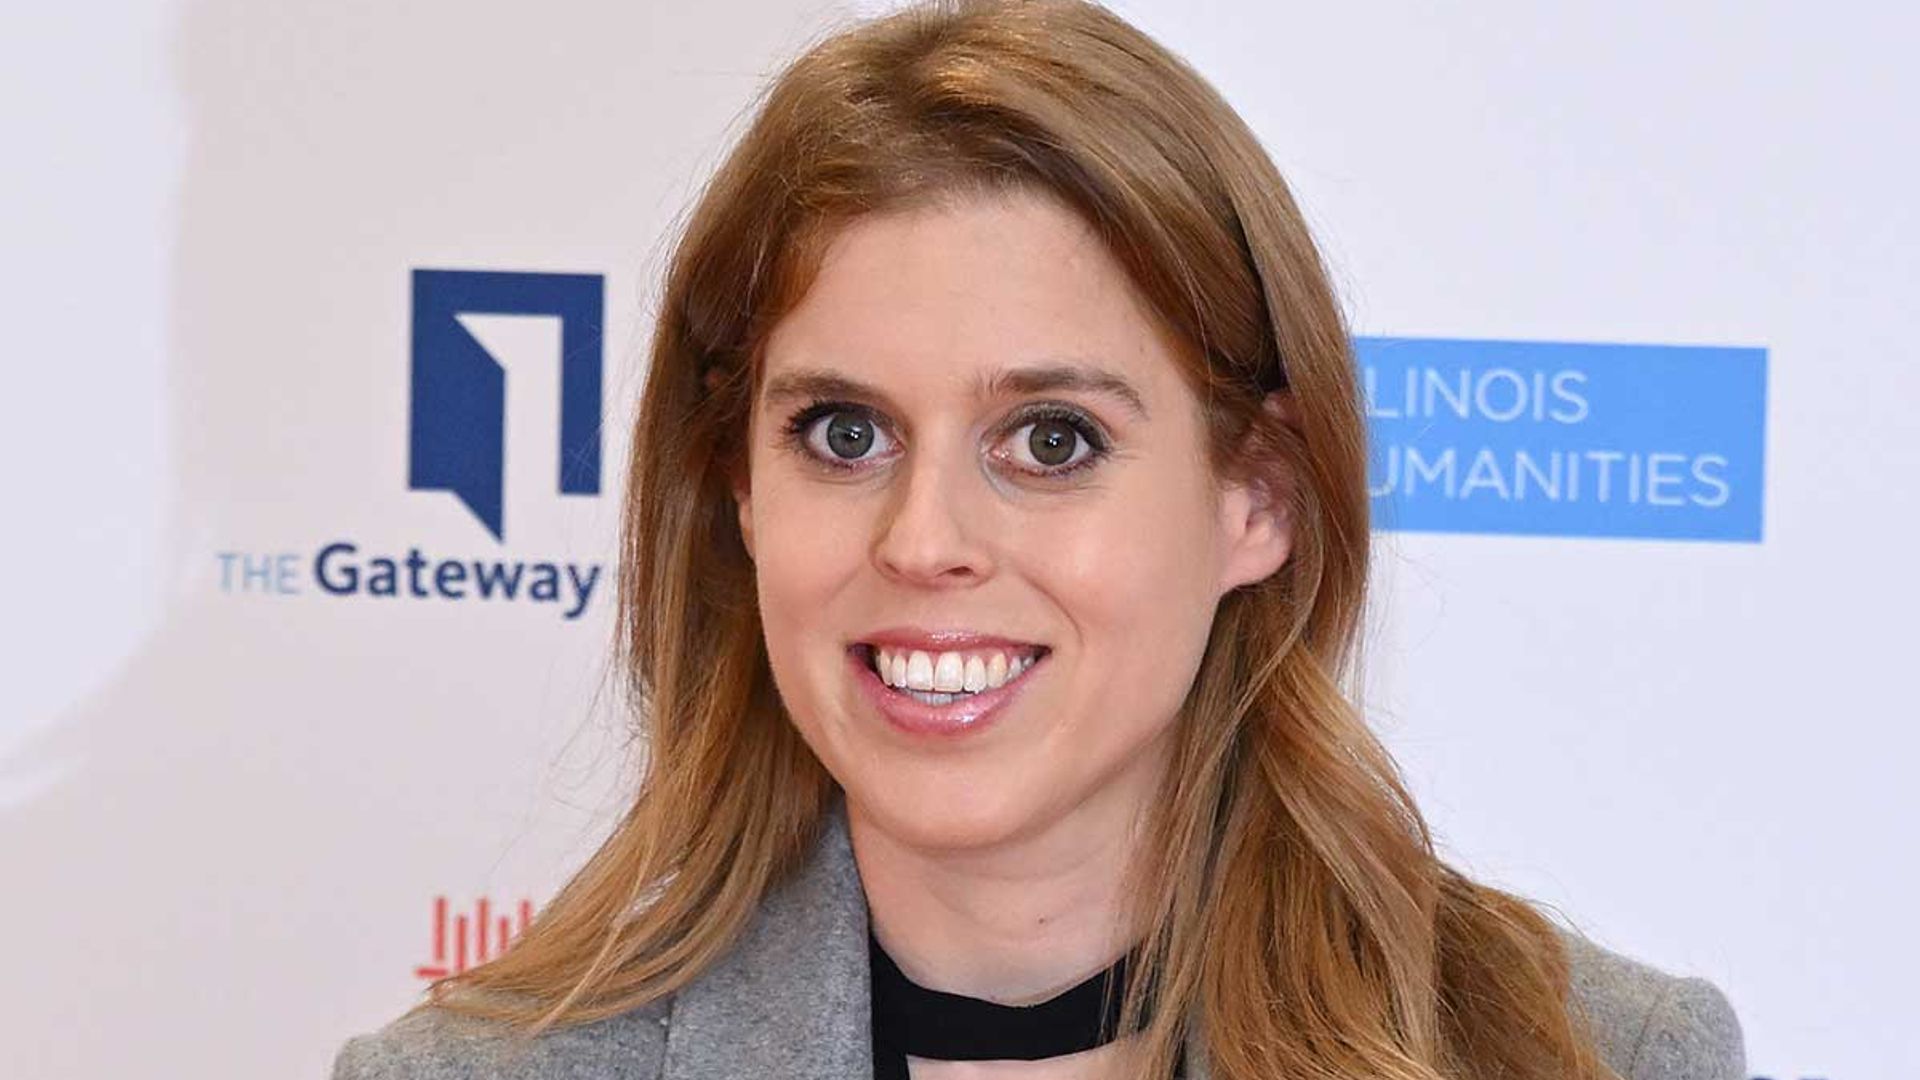 Princess Beatrice spices up her style in Burberry and biker boots